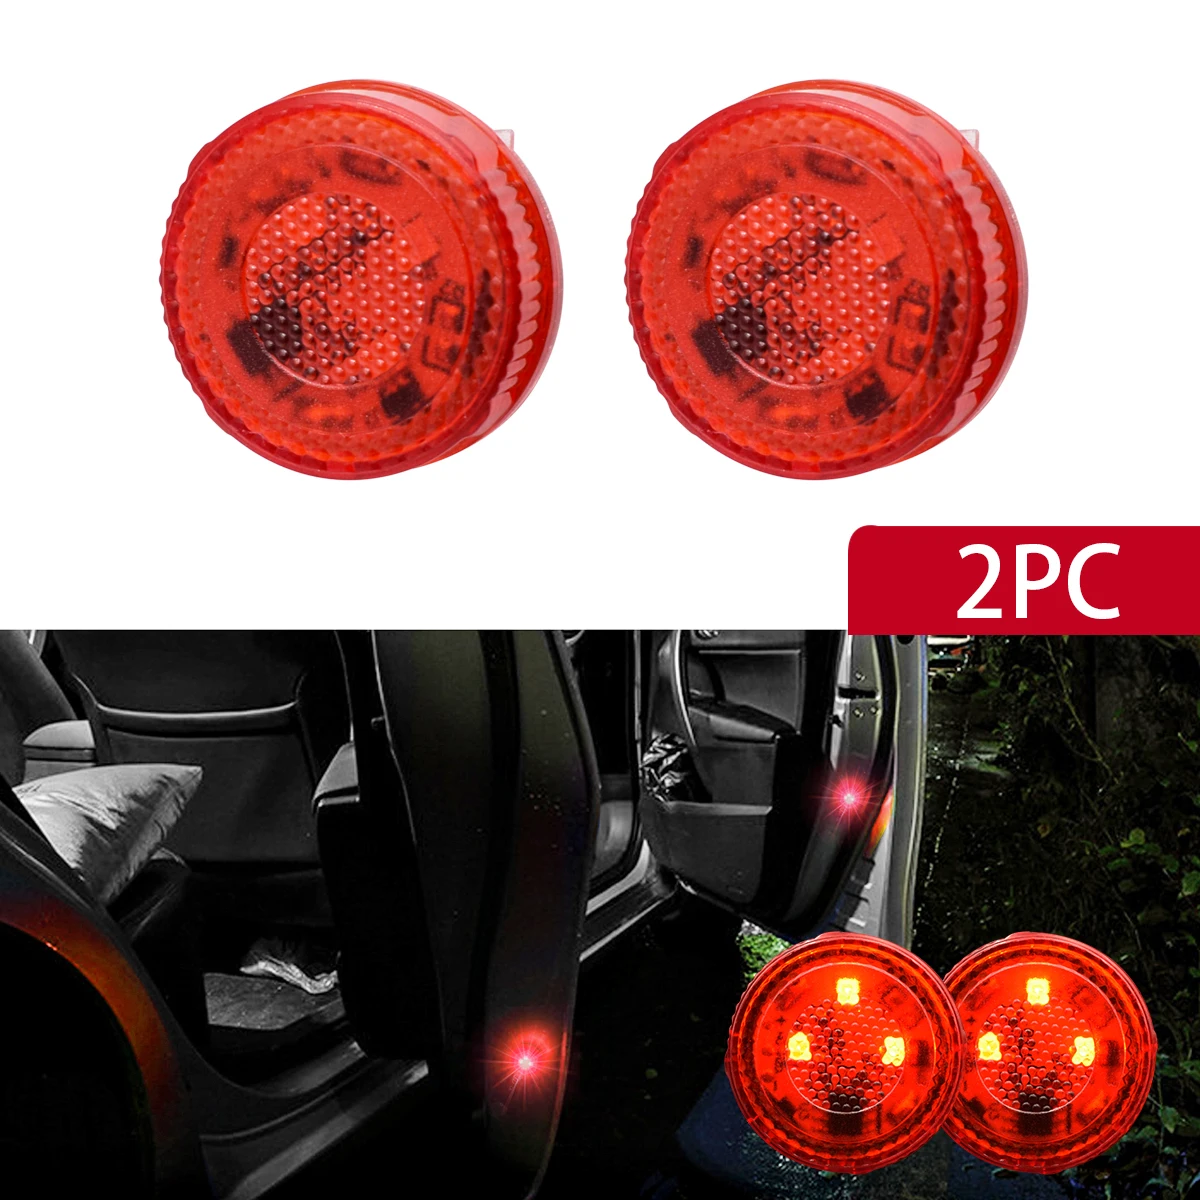 

5 LED Car Door Open Warning Flash Lights Lamps Bulb Safety Magnetic Induction Strobe Waterproof Anti-Collision Accessories 2pcs